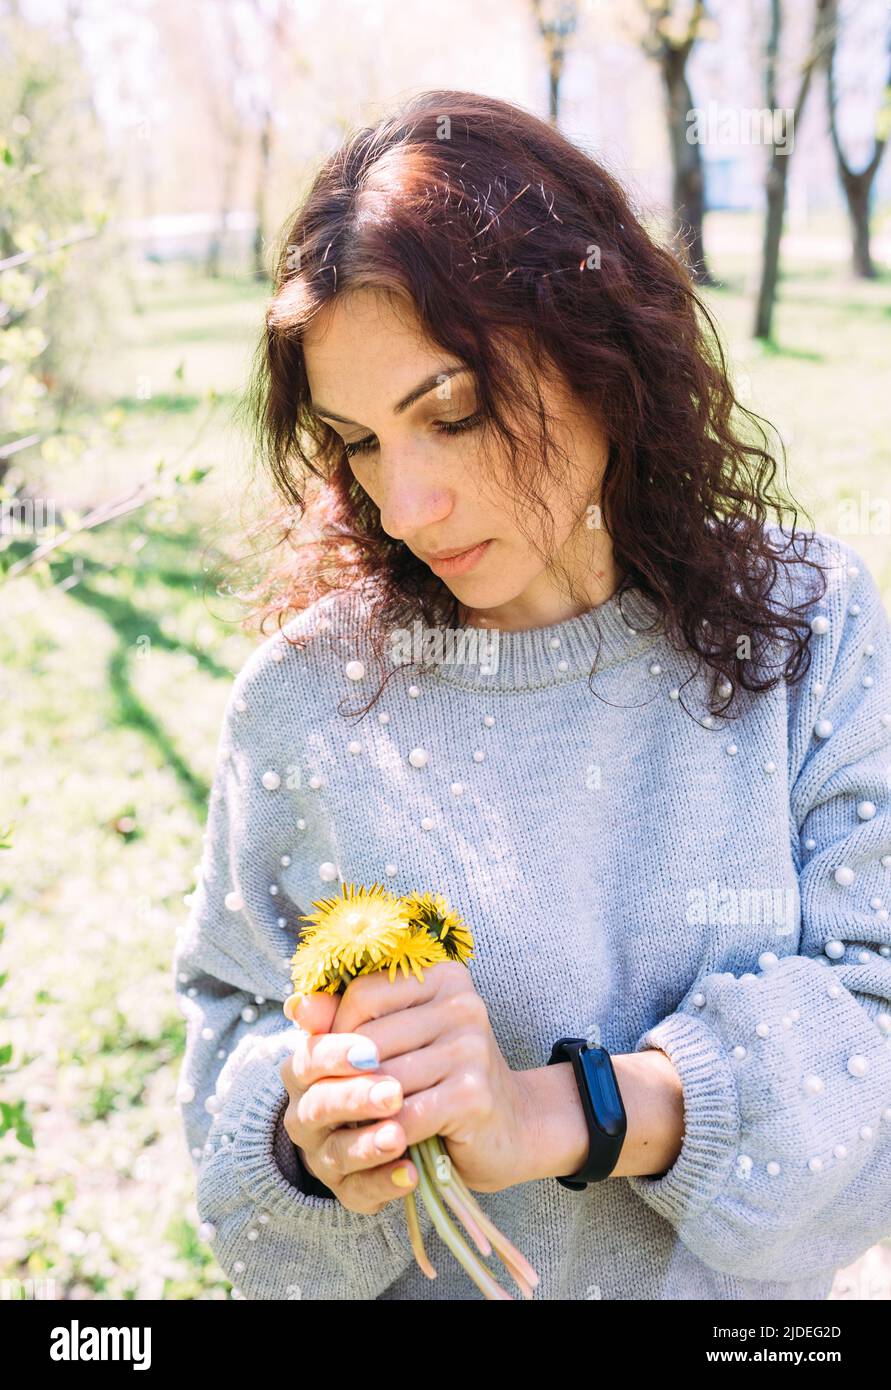 Portrait of a young brunette woman in spring in a park with dandelions Stock Photo